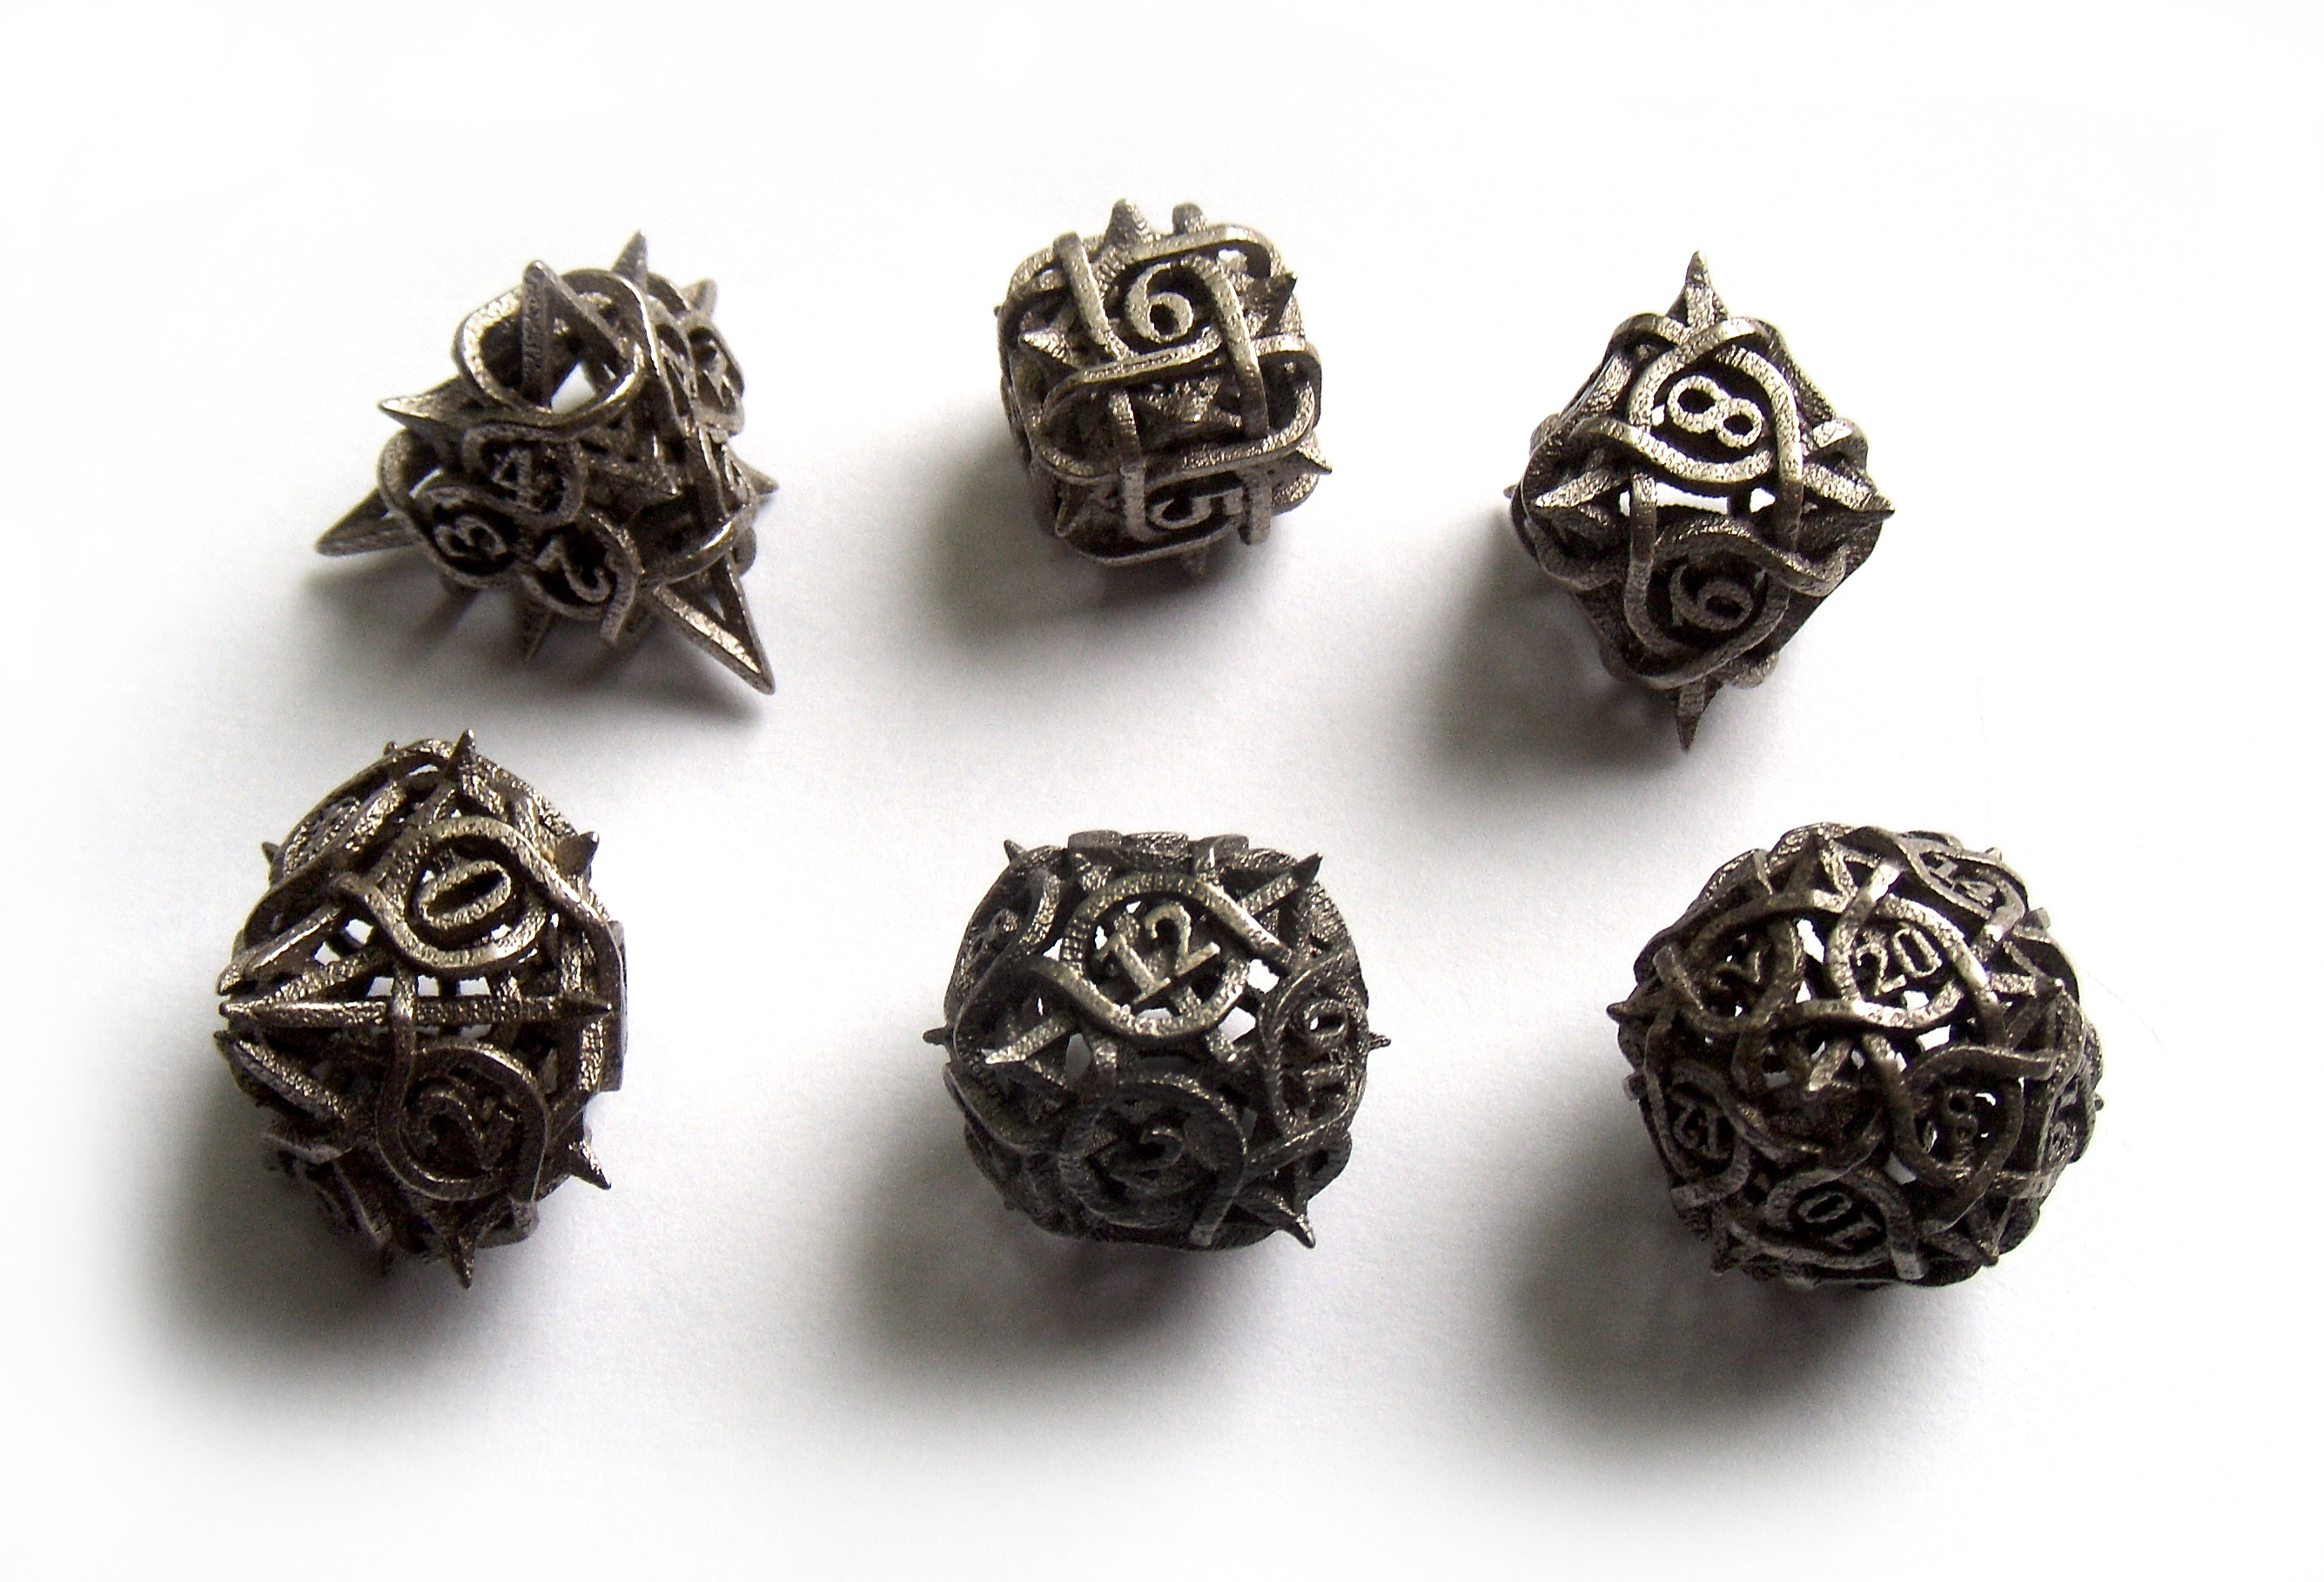 "Thorn Dice" Designed by Wombat, 3D printed by Shapeways.